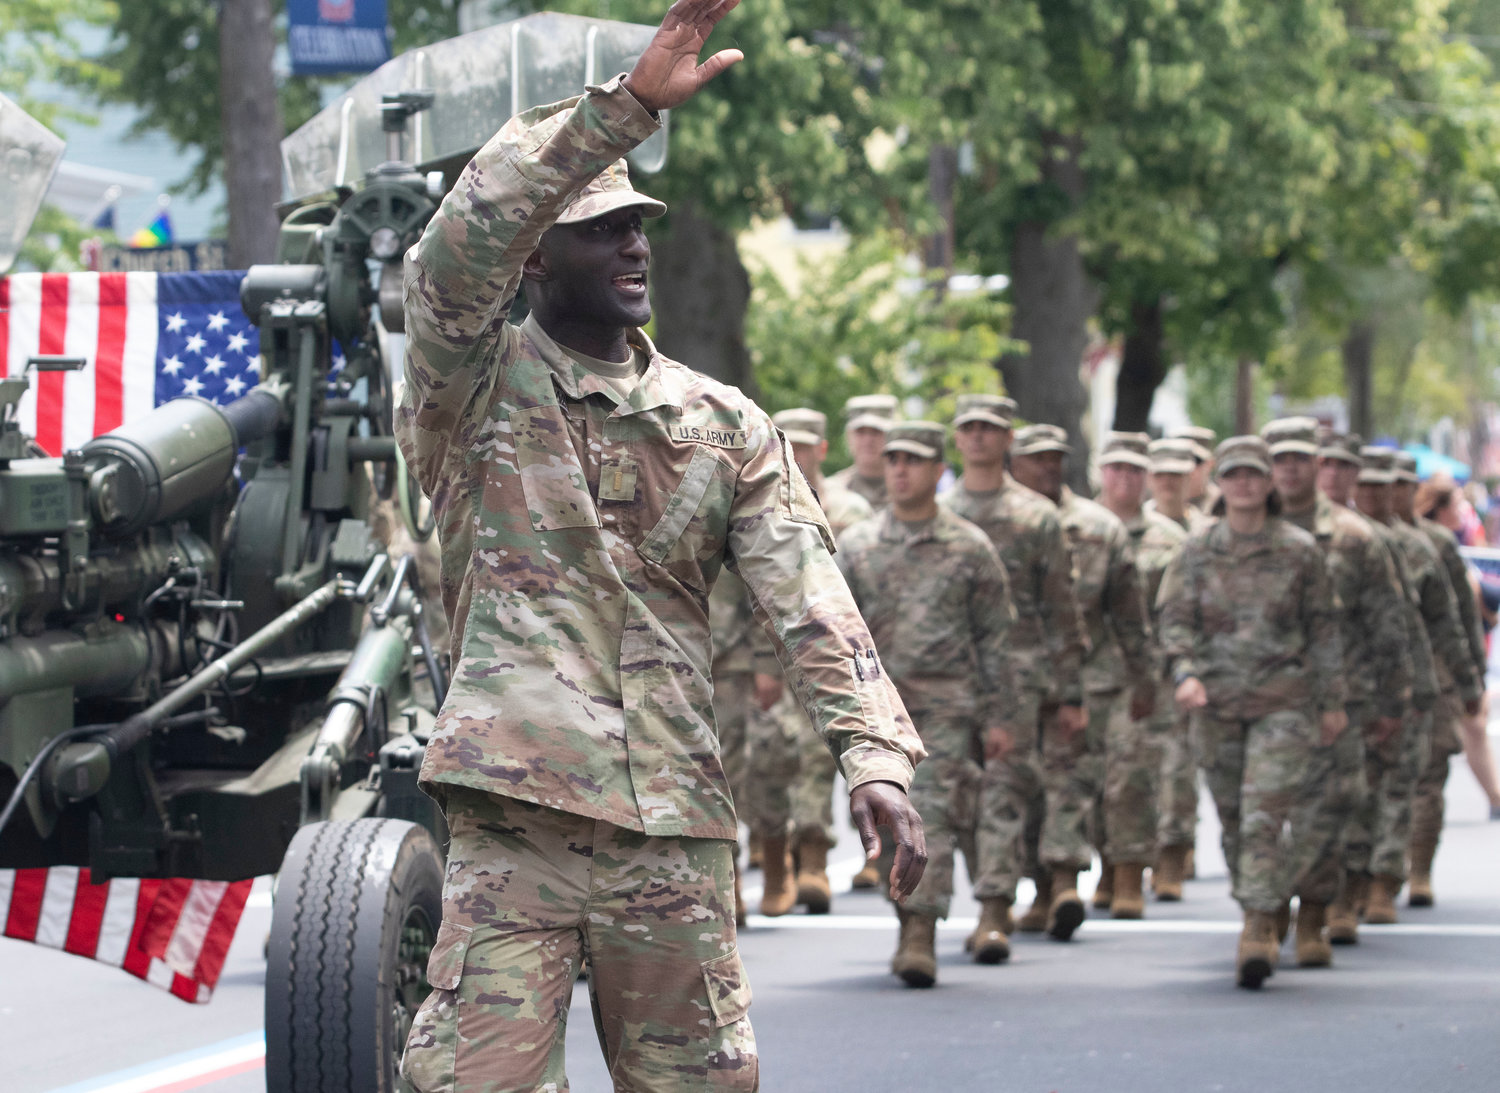 A unit of the U.S. Army marches the route.